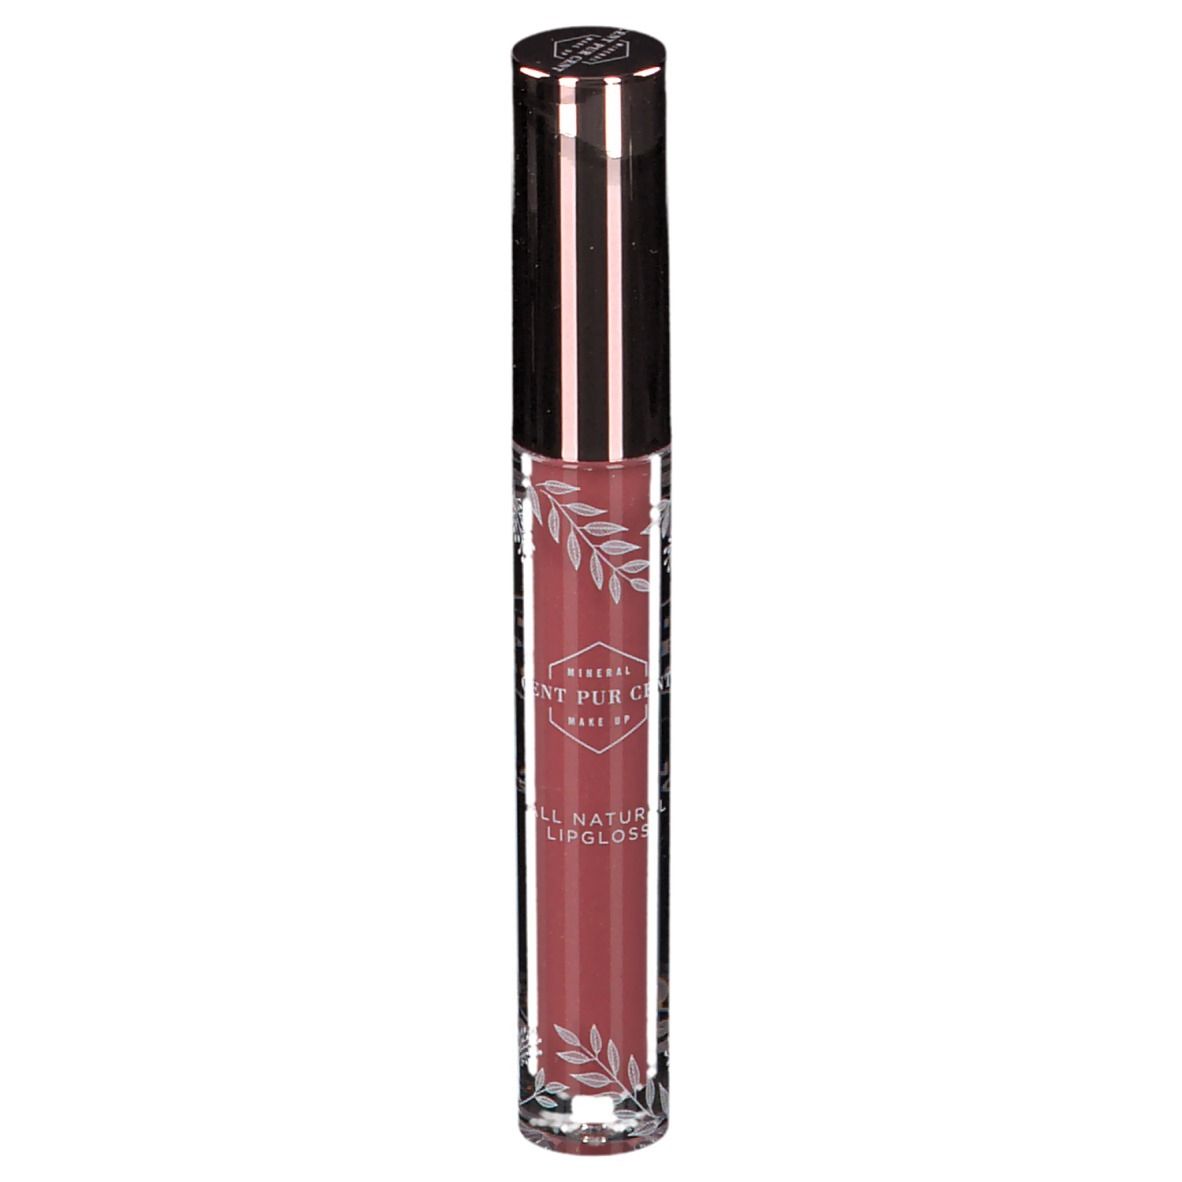 Image of Cent Pur Cent Lipgloss Cuberdon